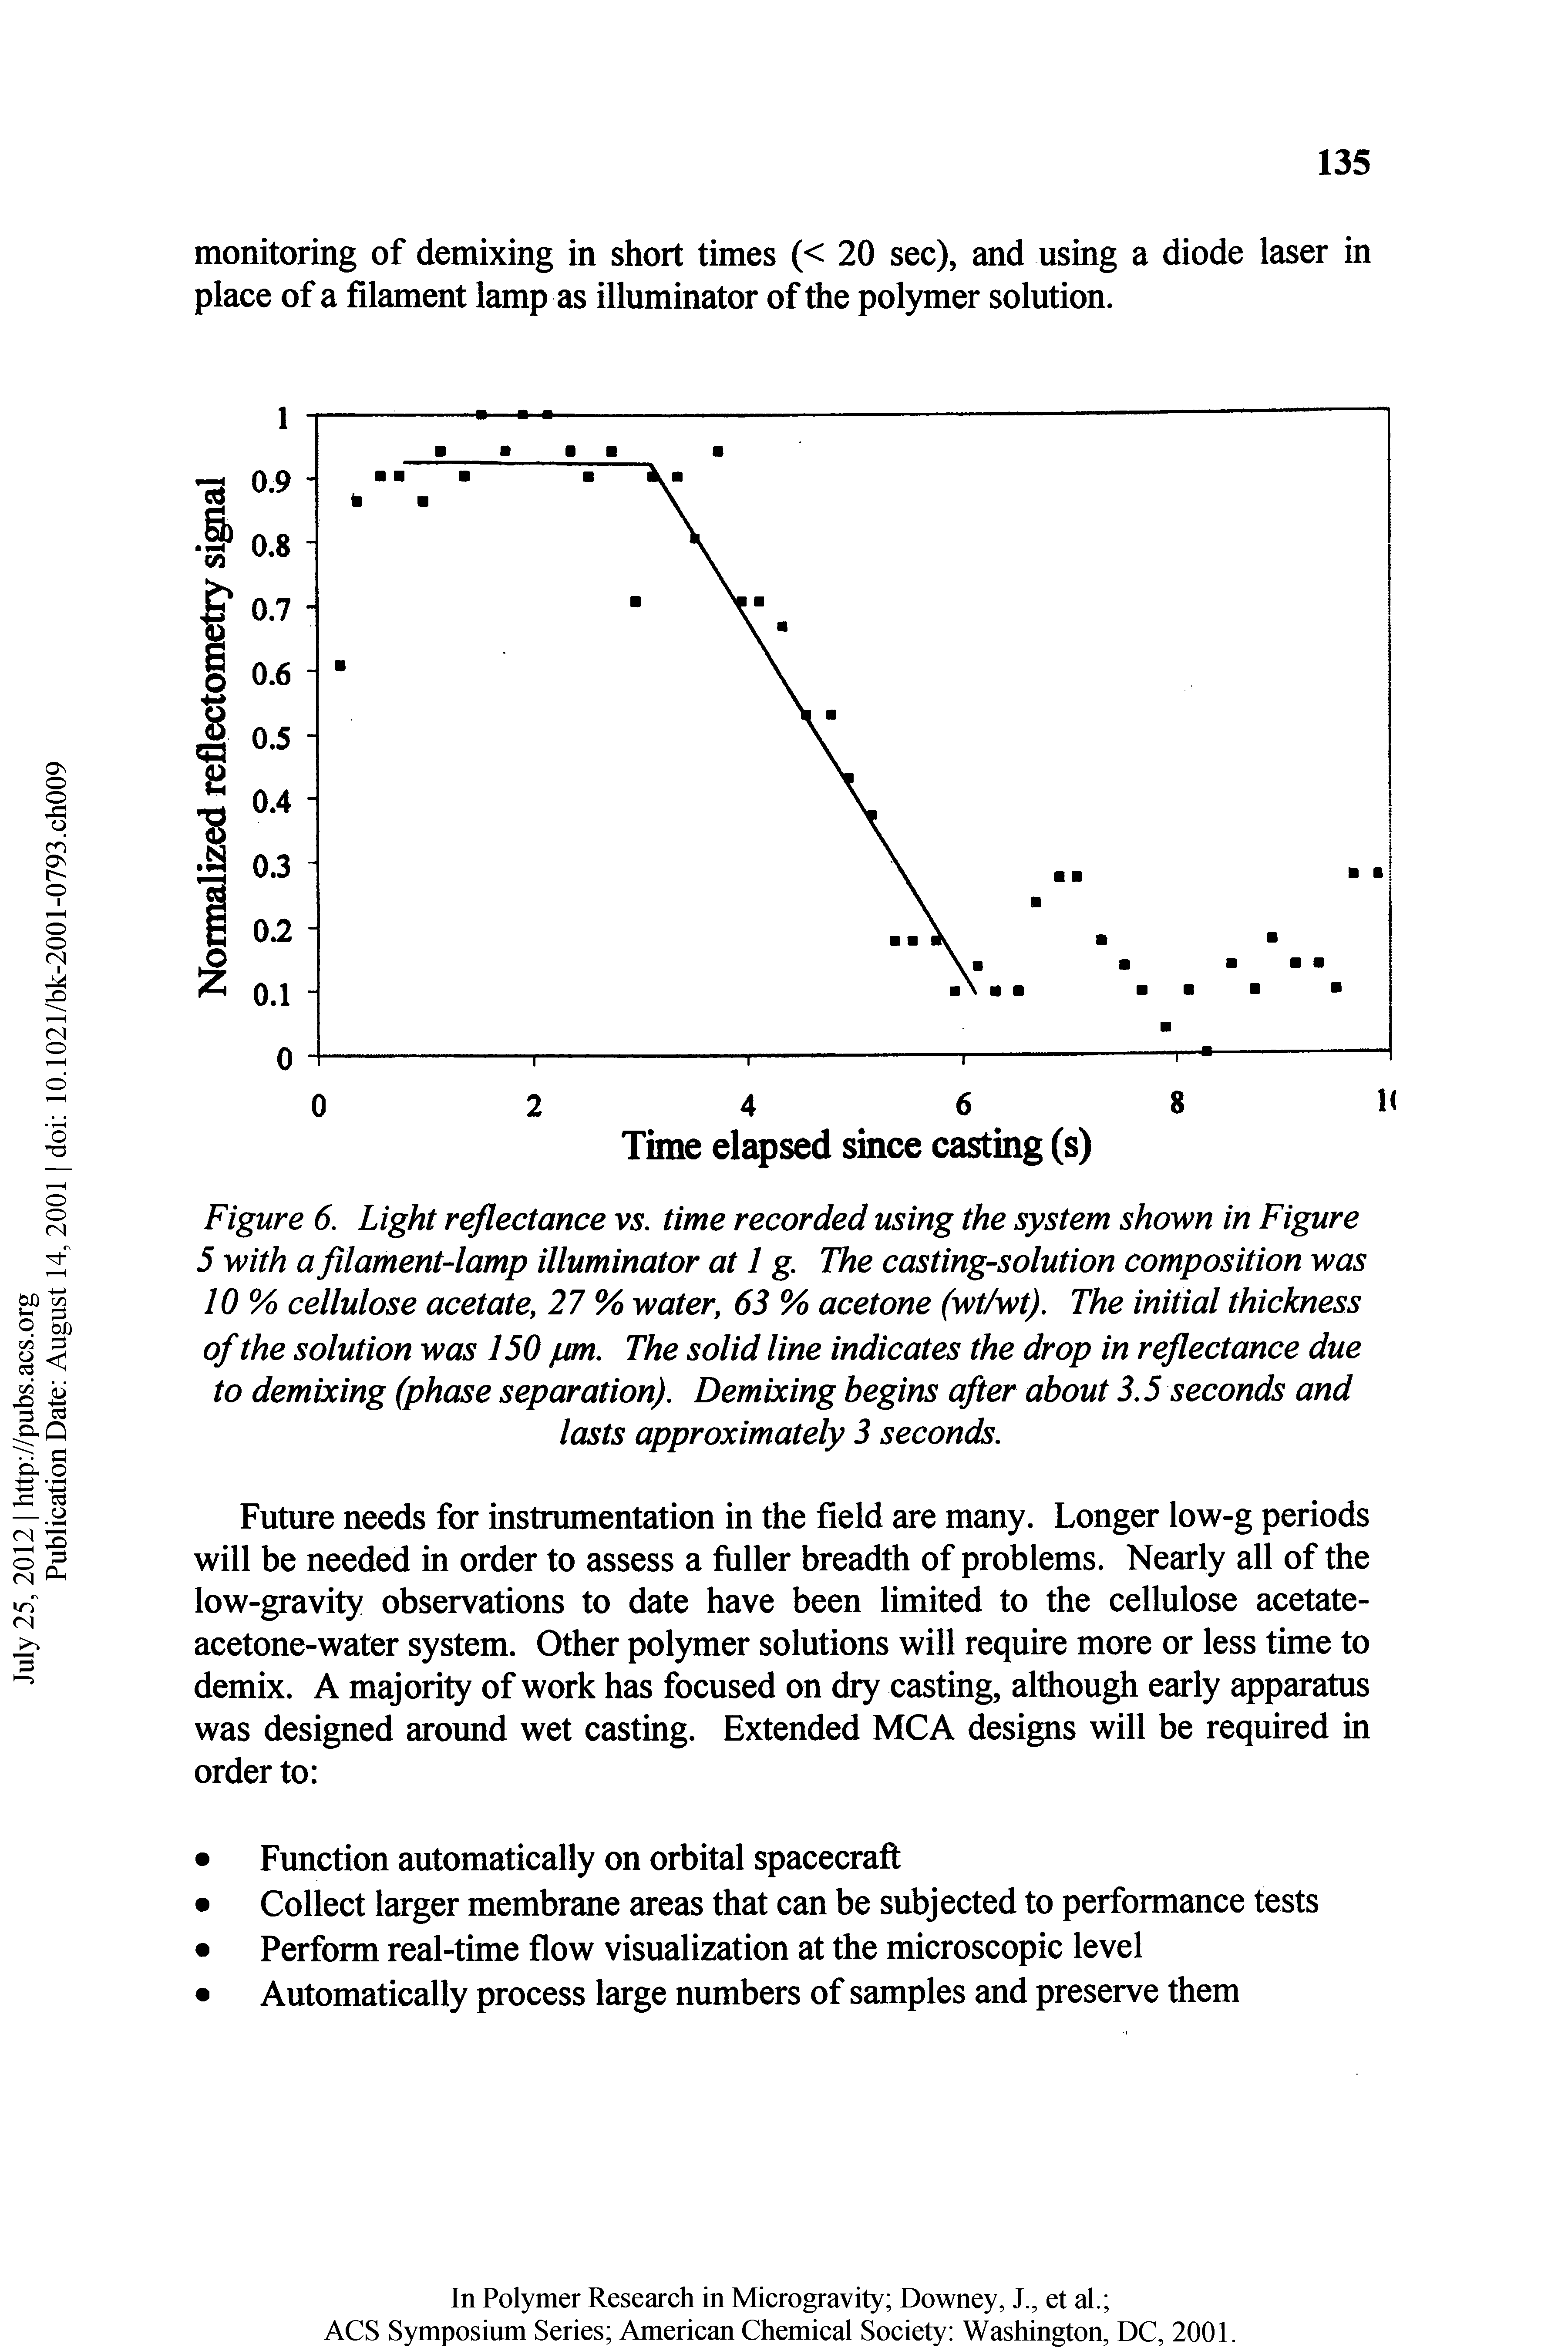 Figure 6. Light reflectance vs. time recorded using the system shown in Figure 5 with a filament-lamp illuminator at 1 g. The casting-solution composition was 10% cellulose acetate, 27 % water, 63 % acetone (wt/wt). The initial thickness of the solution was 150 pm. The solid line indicates the drop in reflectance due to demixing (phase separation). Demixing begins after about 3.5 seconds and lasts approximately 3 seconds.